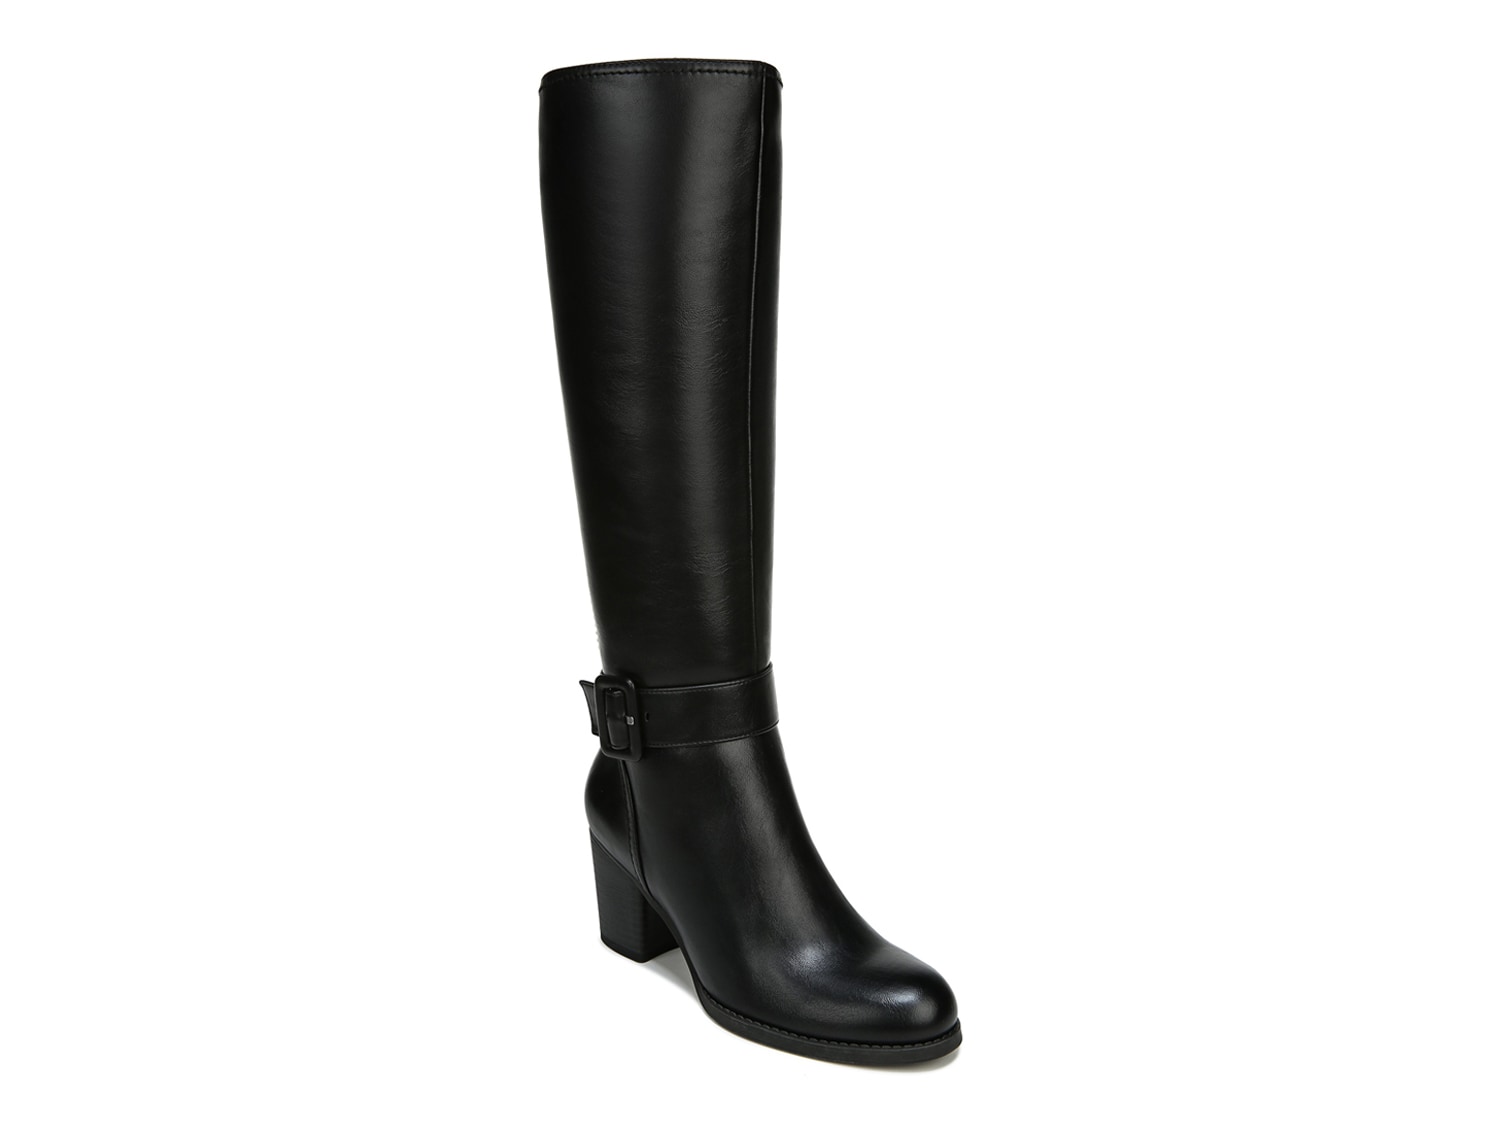 SOUL Naturalizer Twinkle Wide Calf Riding Boot - Free Shipping | DSW